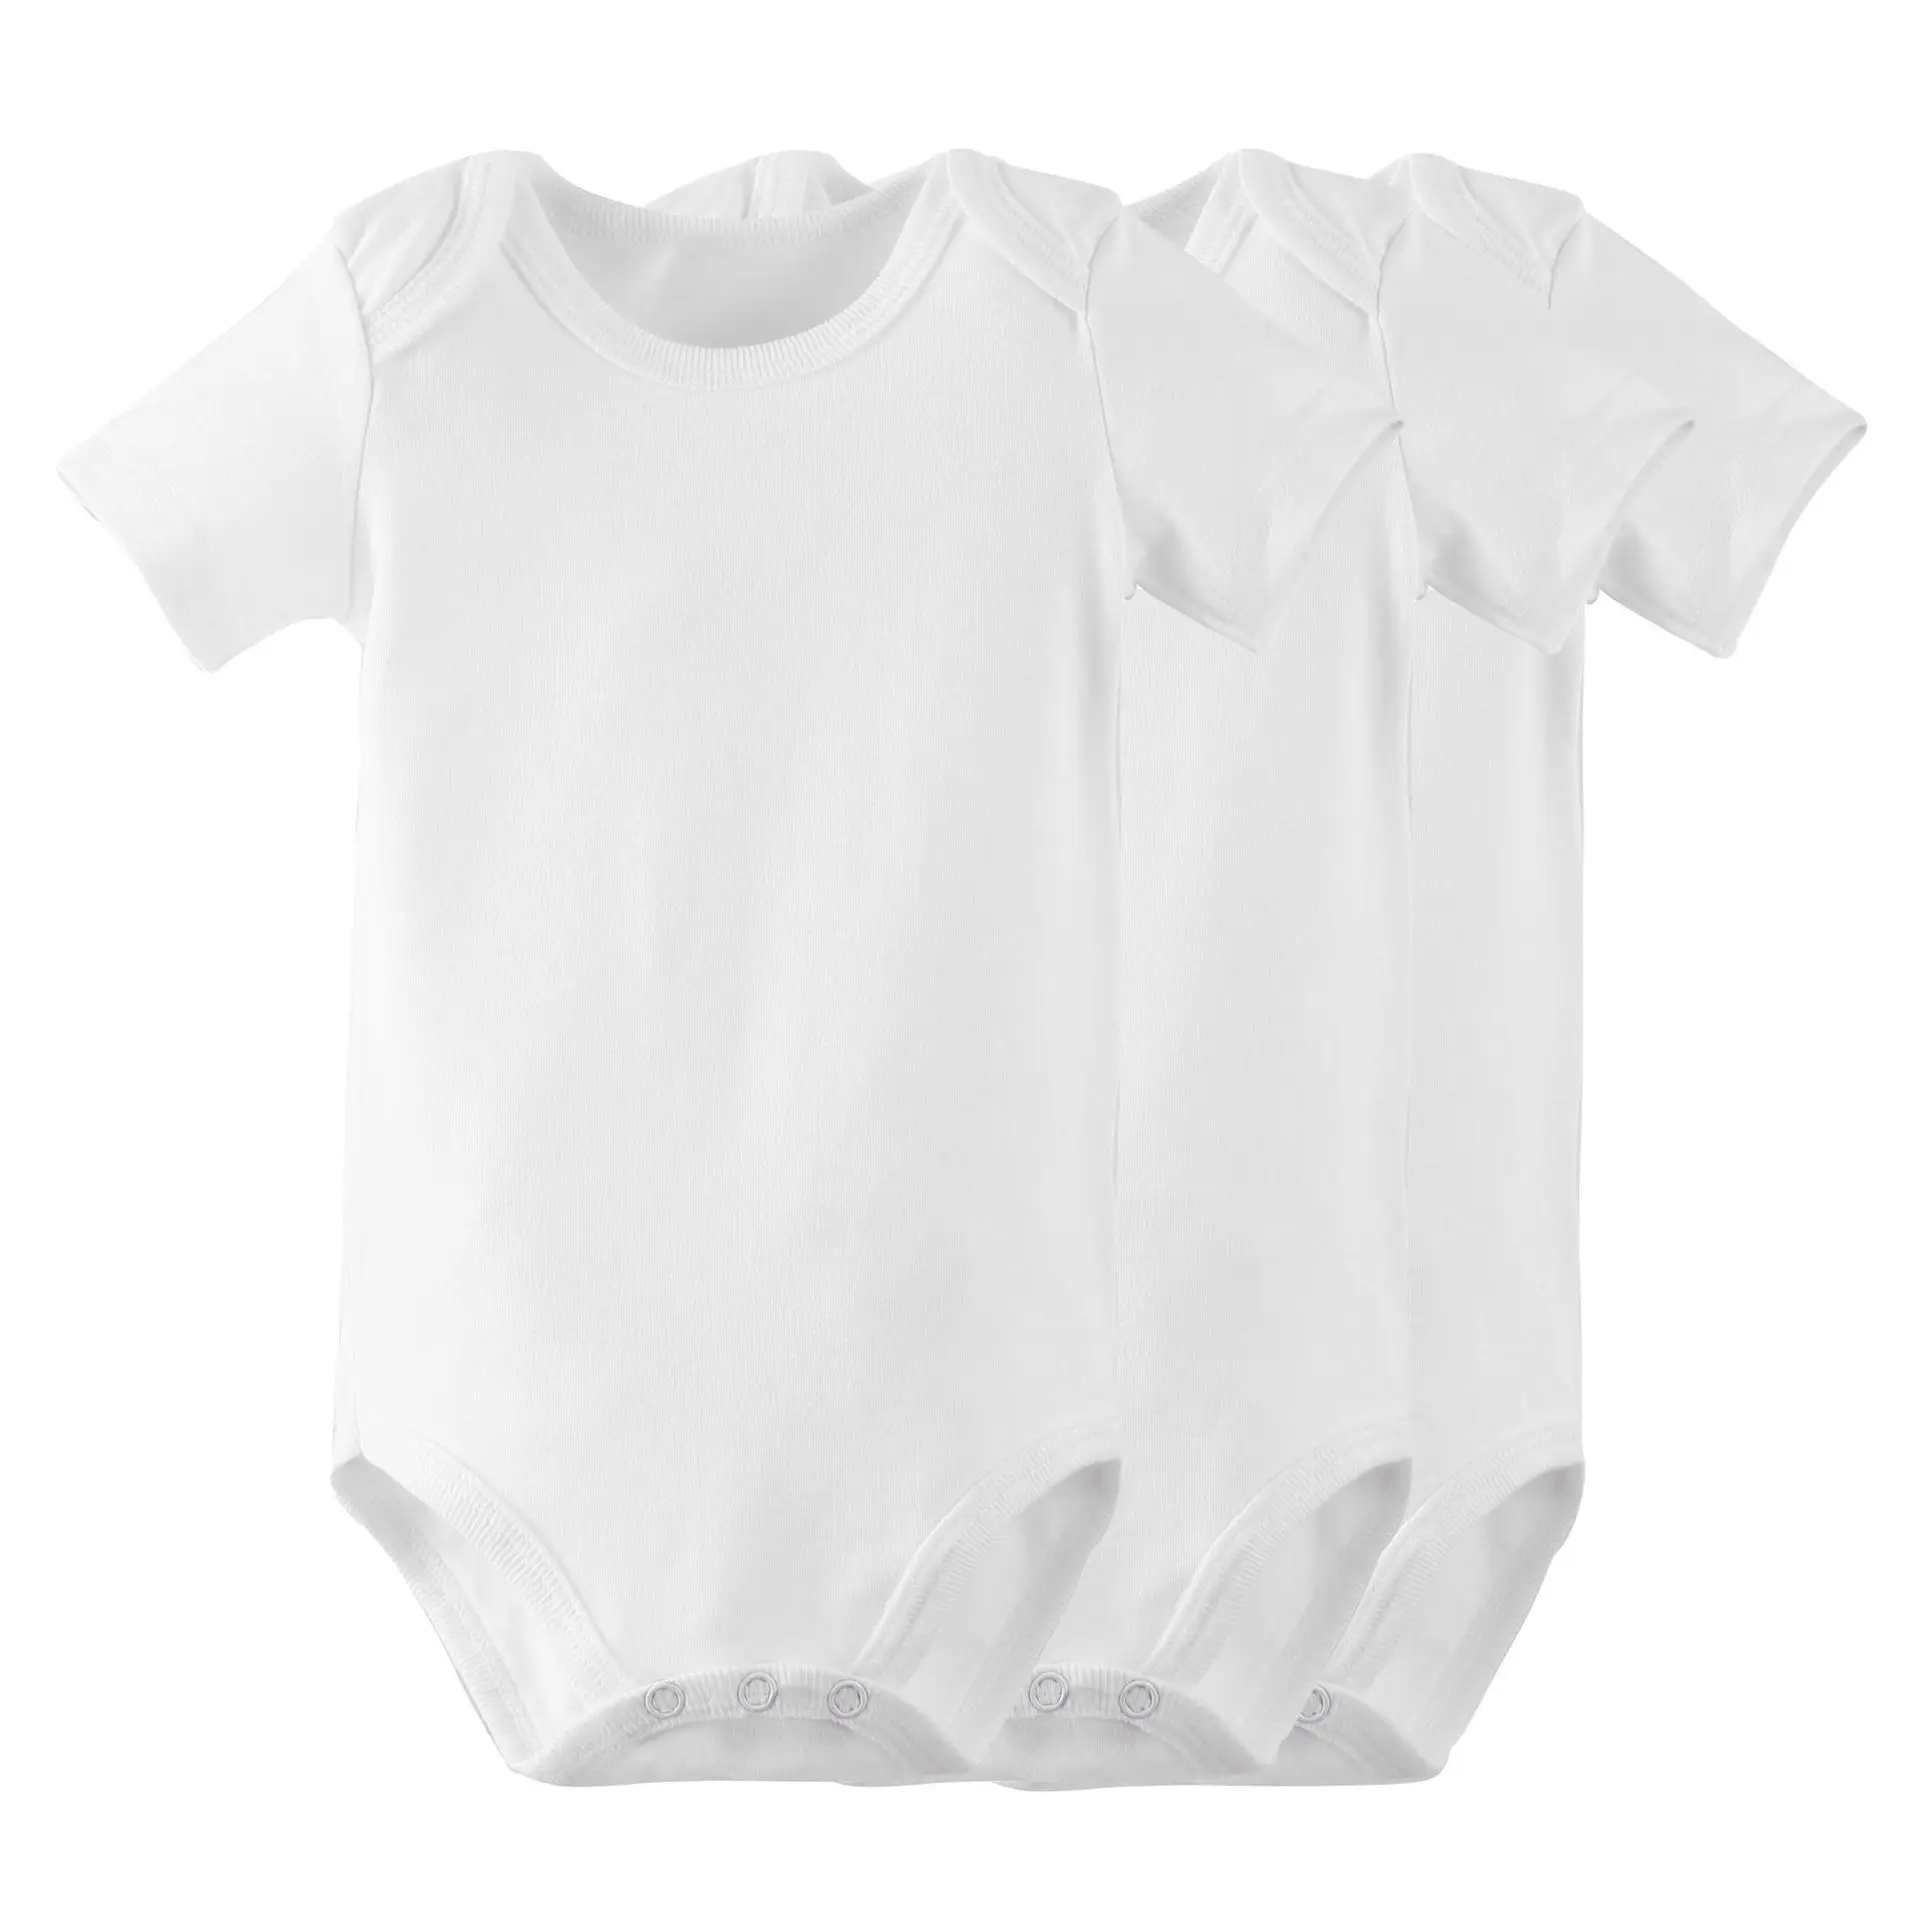 2022 Summer New Baby Clothes Short Sleeved Baby Romper White Baby High ...